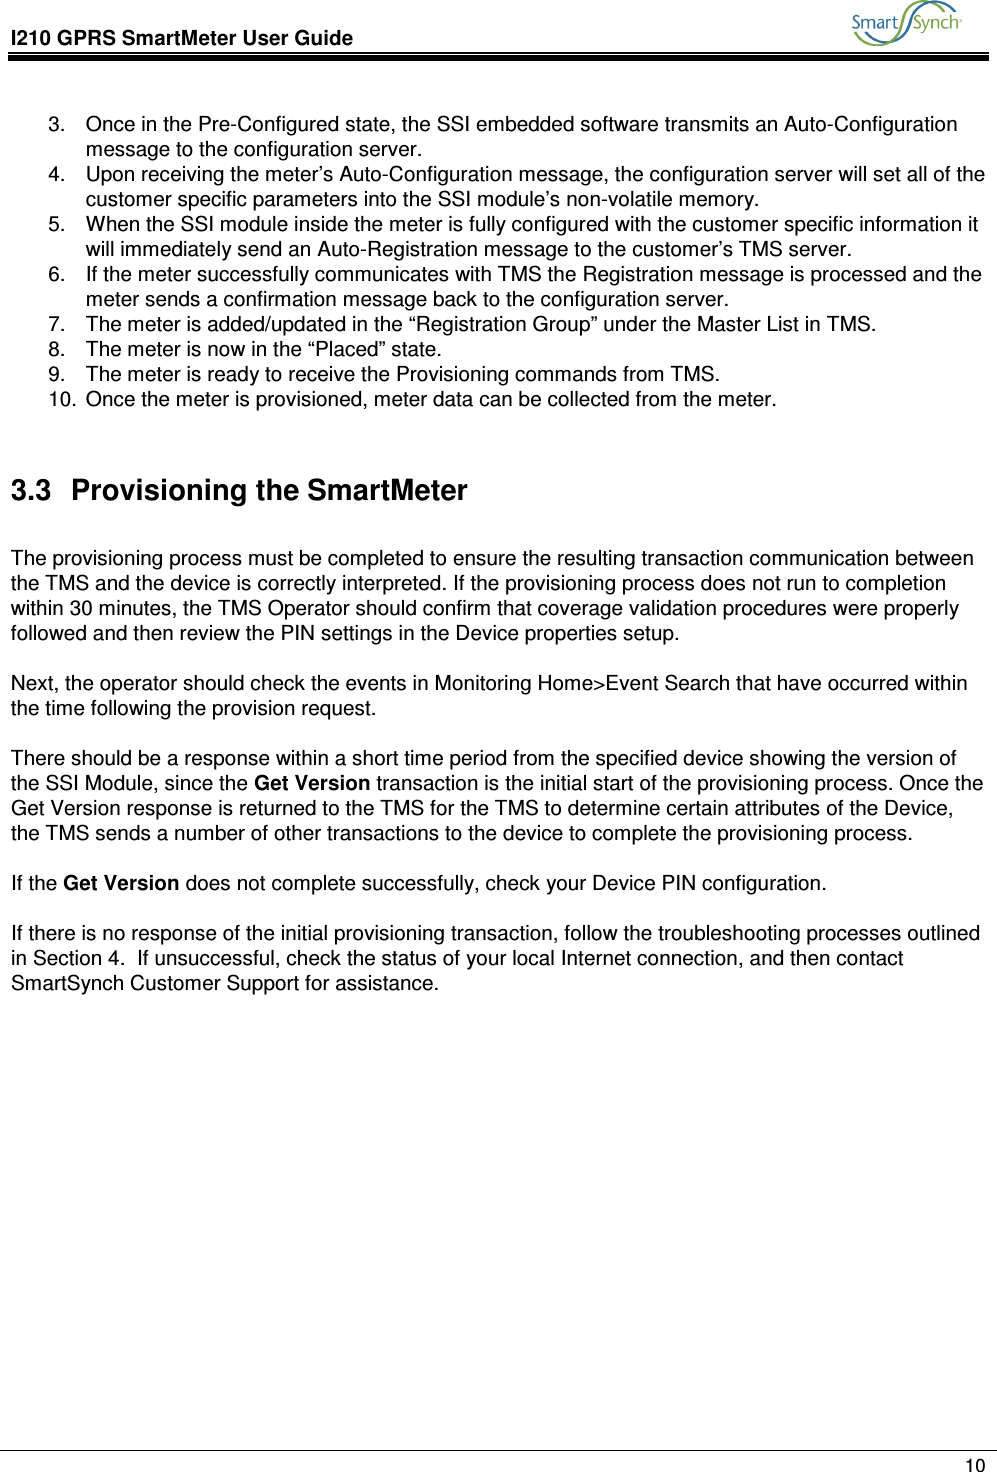 I210 GPRS SmartMeter User Guide               10  3.  Once in the Pre-Configured state, the SSI embedded software transmits an Auto-Configuration message to the configuration server. 4.  Upon receiving the meter’s Auto-Configuration message, the configuration server will set all of the customer specific parameters into the SSI module’s non-volatile memory. 5.  When the SSI module inside the meter is fully configured with the customer specific information it will immediately send an Auto-Registration message to the customer’s TMS server. 6.  If the meter successfully communicates with TMS the Registration message is processed and the meter sends a confirmation message back to the configuration server. 7.  The meter is added/updated in the “Registration Group” under the Master List in TMS. 8.  The meter is now in the “Placed” state. 9.  The meter is ready to receive the Provisioning commands from TMS. 10.  Once the meter is provisioned, meter data can be collected from the meter.  3.3  Provisioning the SmartMeter  The provisioning process must be completed to ensure the resulting transaction communication between the TMS and the device is correctly interpreted. If the provisioning process does not run to completion within 30 minutes, the TMS Operator should confirm that coverage validation procedures were properly followed and then review the PIN settings in the Device properties setup.  Next, the operator should check the events in Monitoring Home&gt;Event Search that have occurred within the time following the provision request.   There should be a response within a short time period from the specified device showing the version of the SSI Module, since the Get Version transaction is the initial start of the provisioning process. Once the Get Version response is returned to the TMS for the TMS to determine certain attributes of the Device, the TMS sends a number of other transactions to the device to complete the provisioning process.  If the Get Version does not complete successfully, check your Device PIN configuration.  If there is no response of the initial provisioning transaction, follow the troubleshooting processes outlined in Section 4.  If unsuccessful, check the status of your local Internet connection, and then contact SmartSynch Customer Support for assistance.              